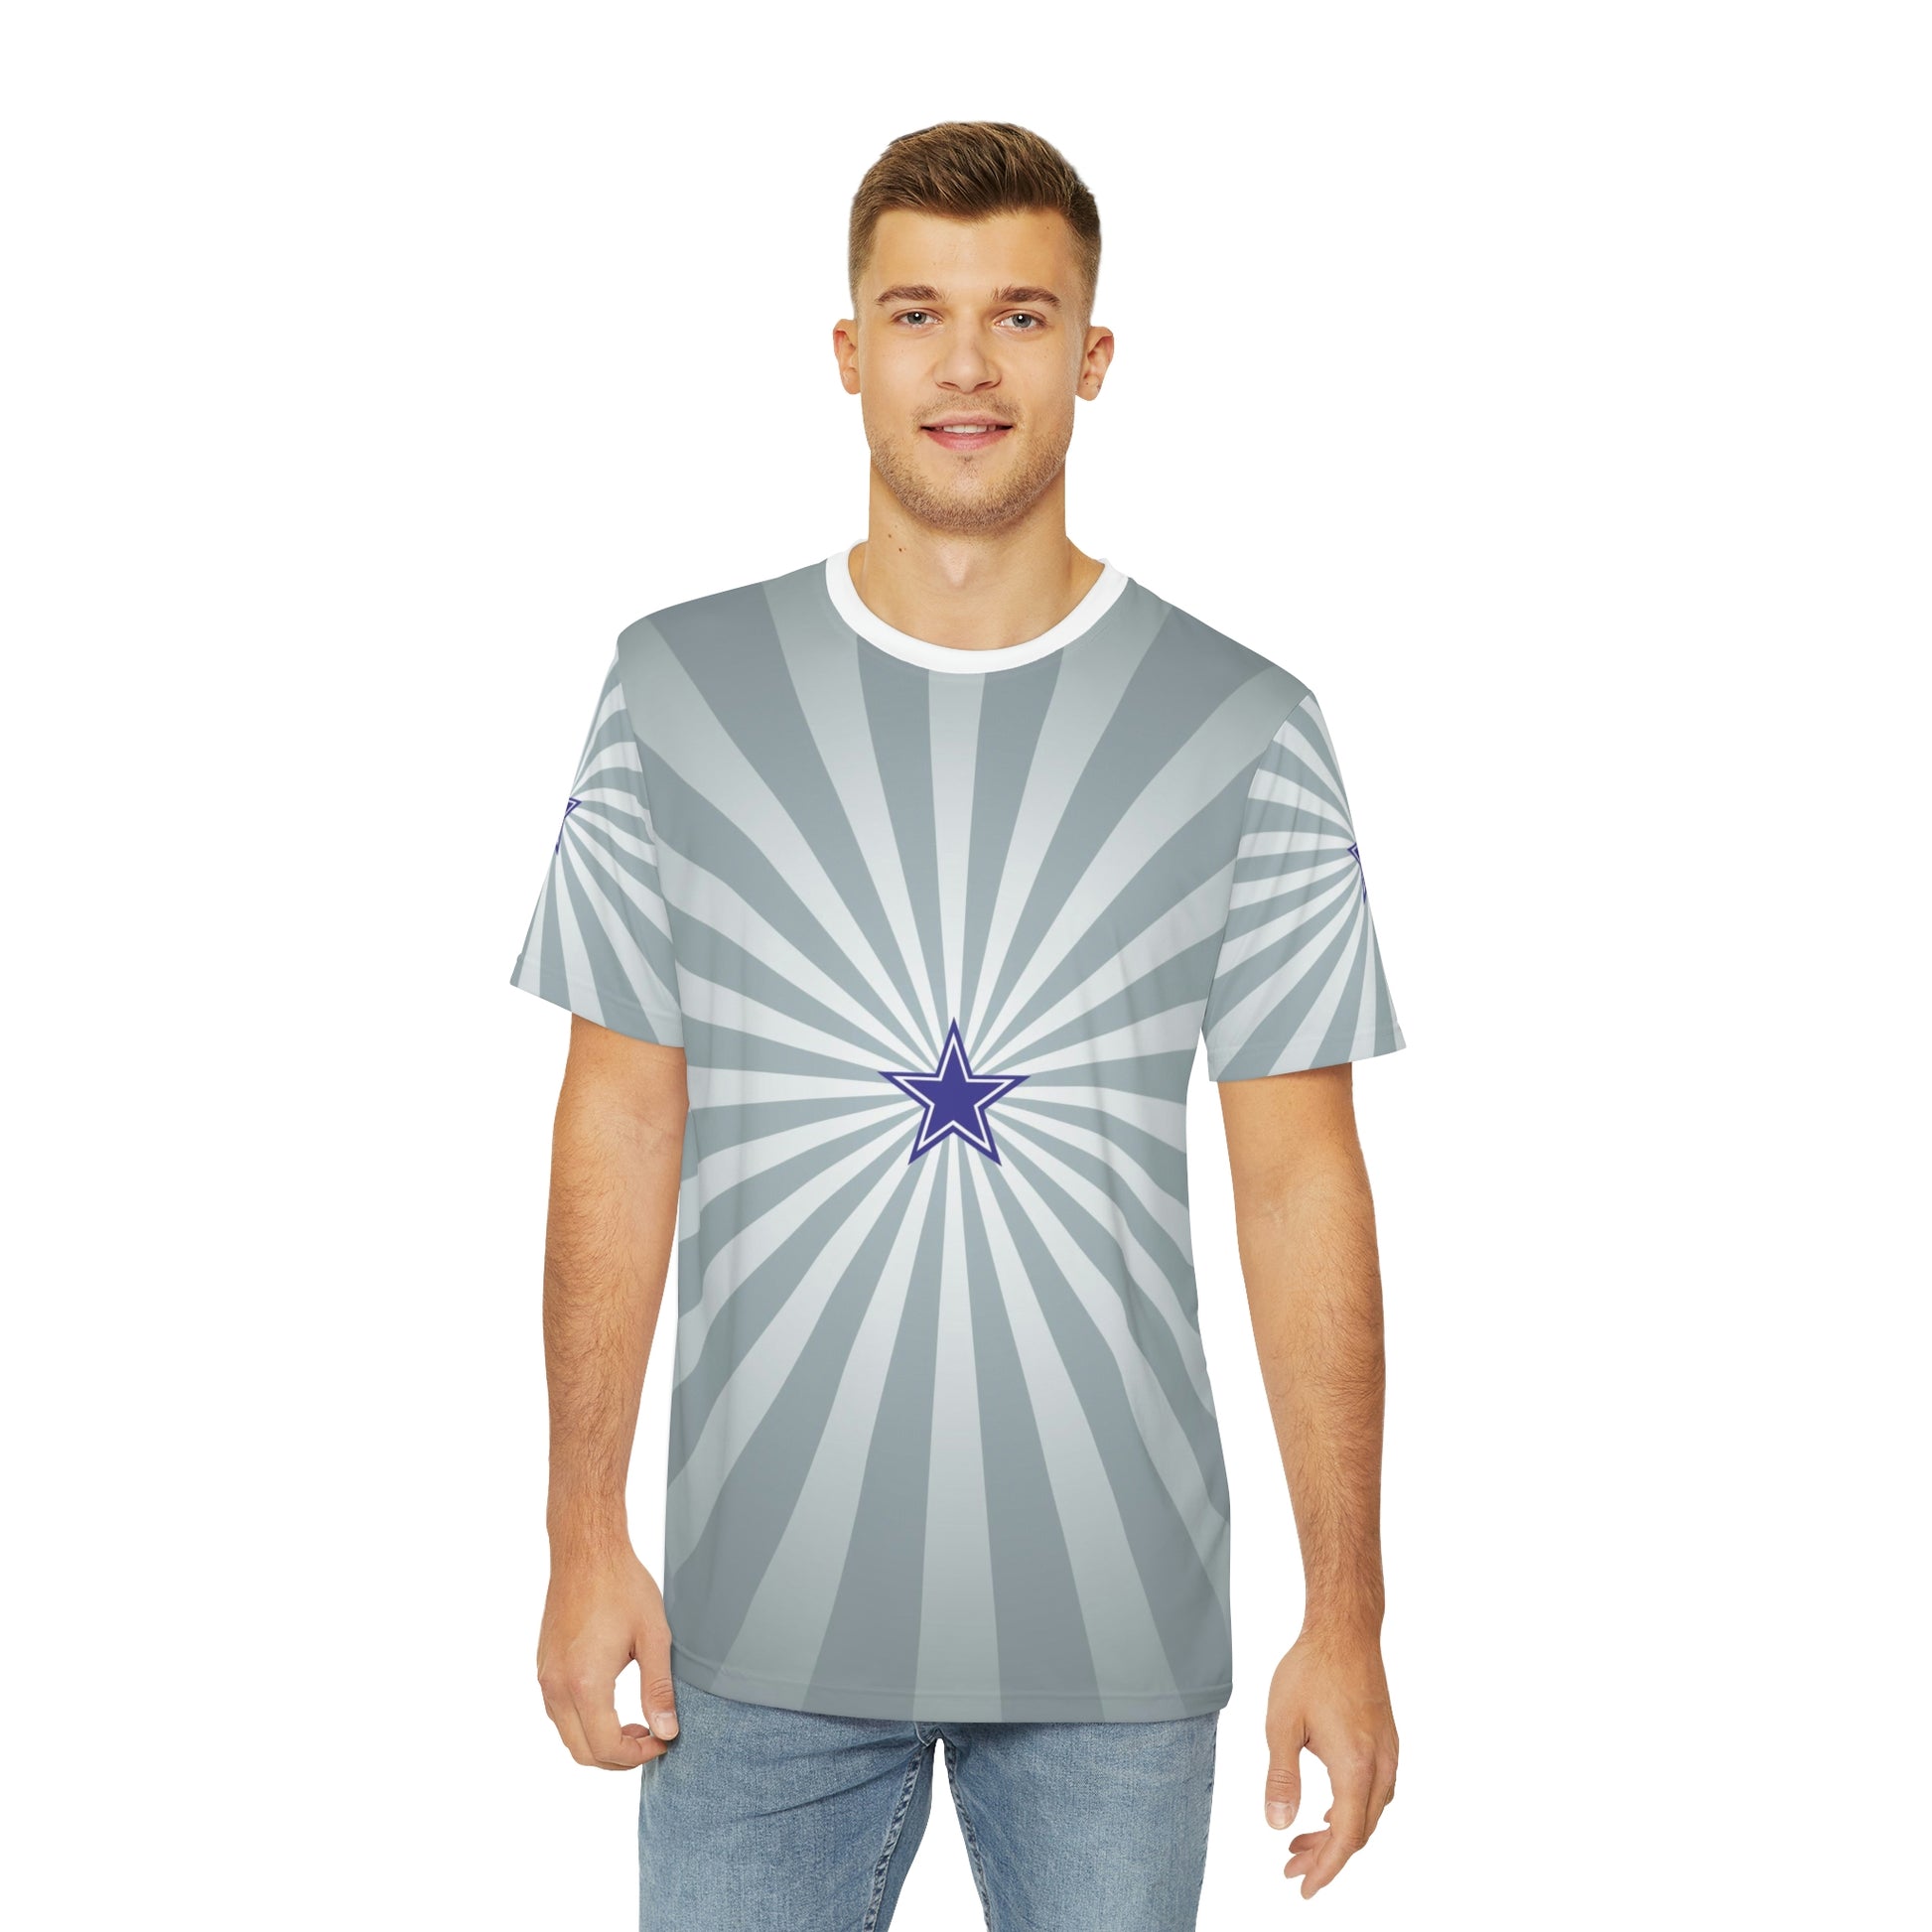 Geotrott NFL Dallas Cowboys Men's Polyester All Over Print Tee T-Shirt-All Over Prints-Geotrott